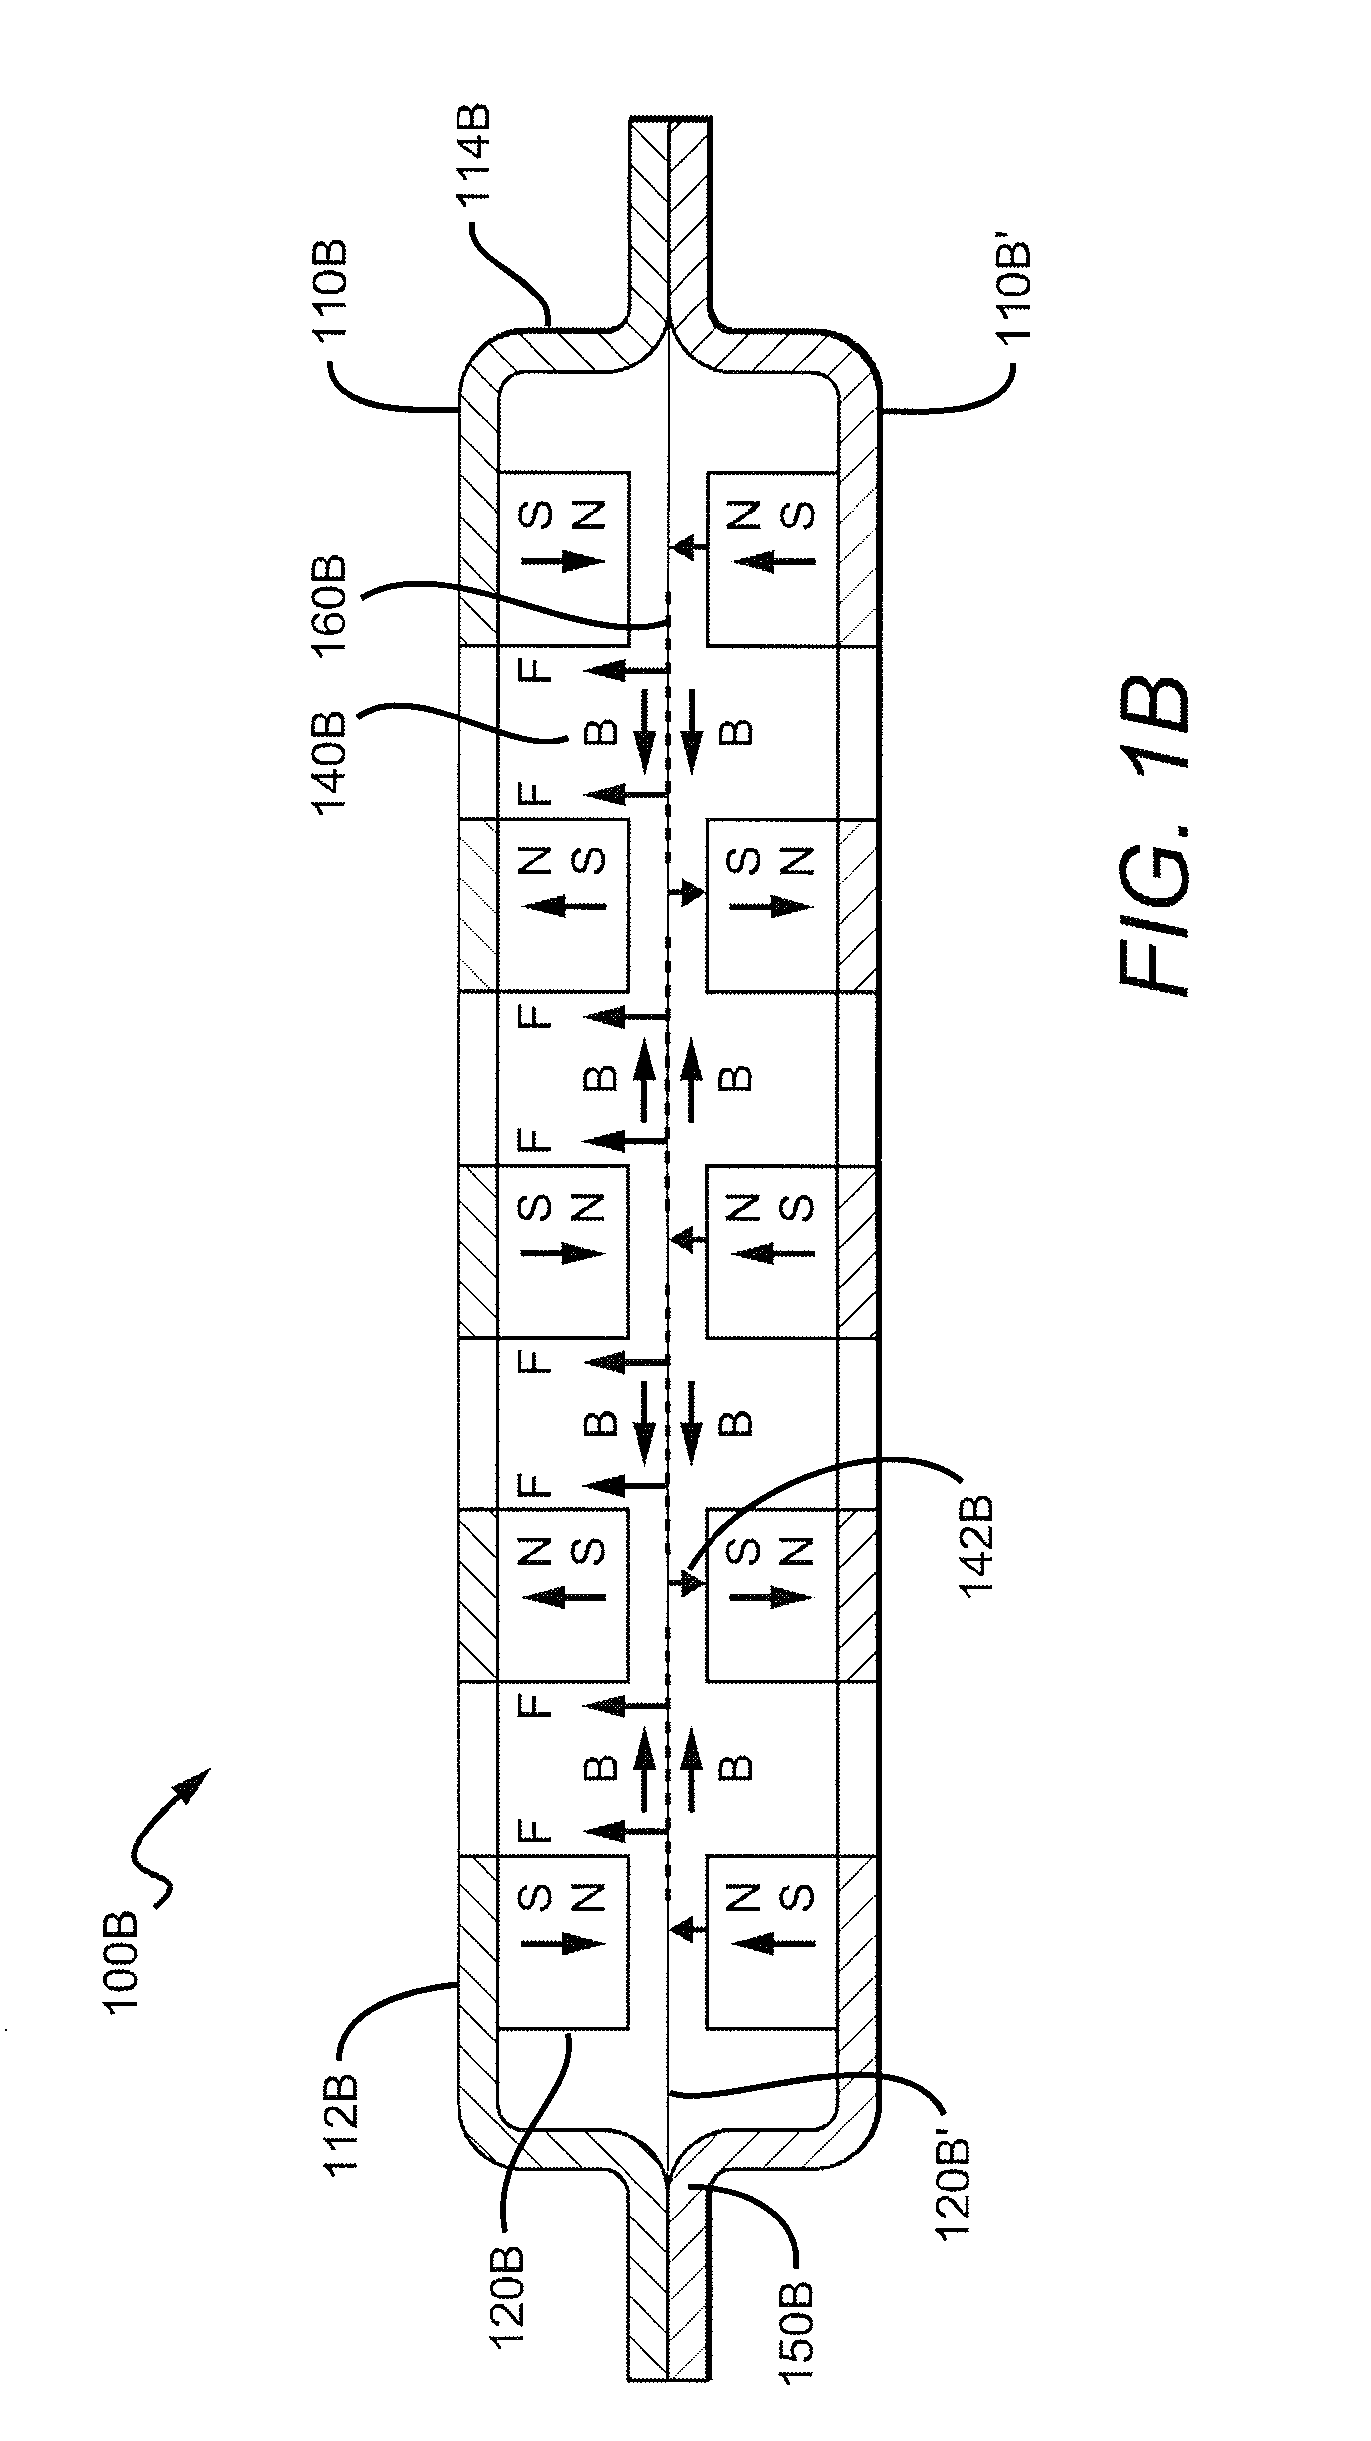 Full range planar magnetic transducers and arrays thereof